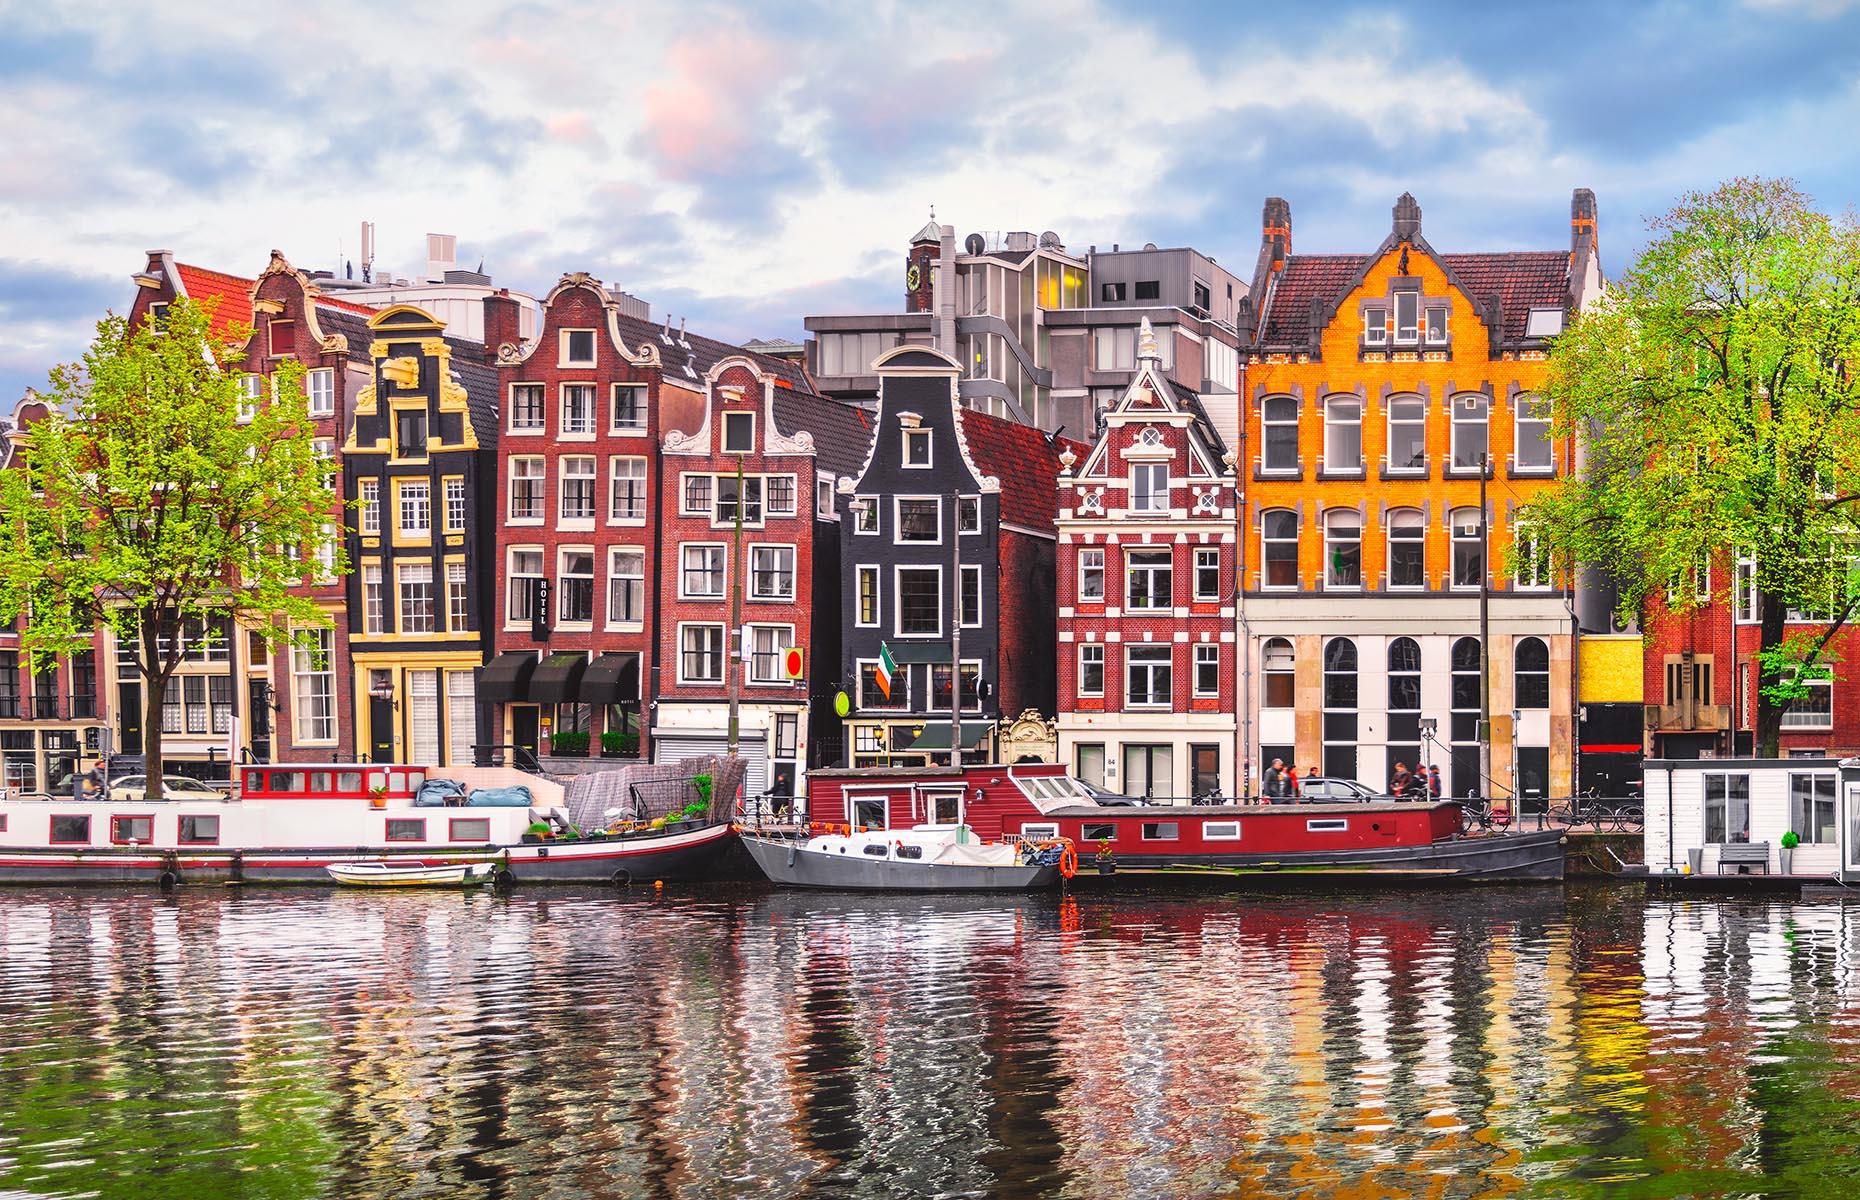 <p>The Dutch capital conjures images of tightly packed gabled houses lining the city's network of canals and cyclists who rule the streets. <a href="http://www.loveexploring.com/guides/85437/explore-amsterdam-top-things-to-see-and-do-best-hotels-and-where-to-eat">Amsterdam</a> oozes a cool, modern vibe. The food scene is top-notch, ranging from beer bars to upscale dining experiences. The city is also home to one of Europe's most celebrated museums – the Rijksmuseum. Now take a look at <a href="https://www.loveexploring.com/galleries/94624/stunning-images-of-europes-most-adorable-small-towns-and-villages">Europe's most adorable small towns and villages</a>.</p>